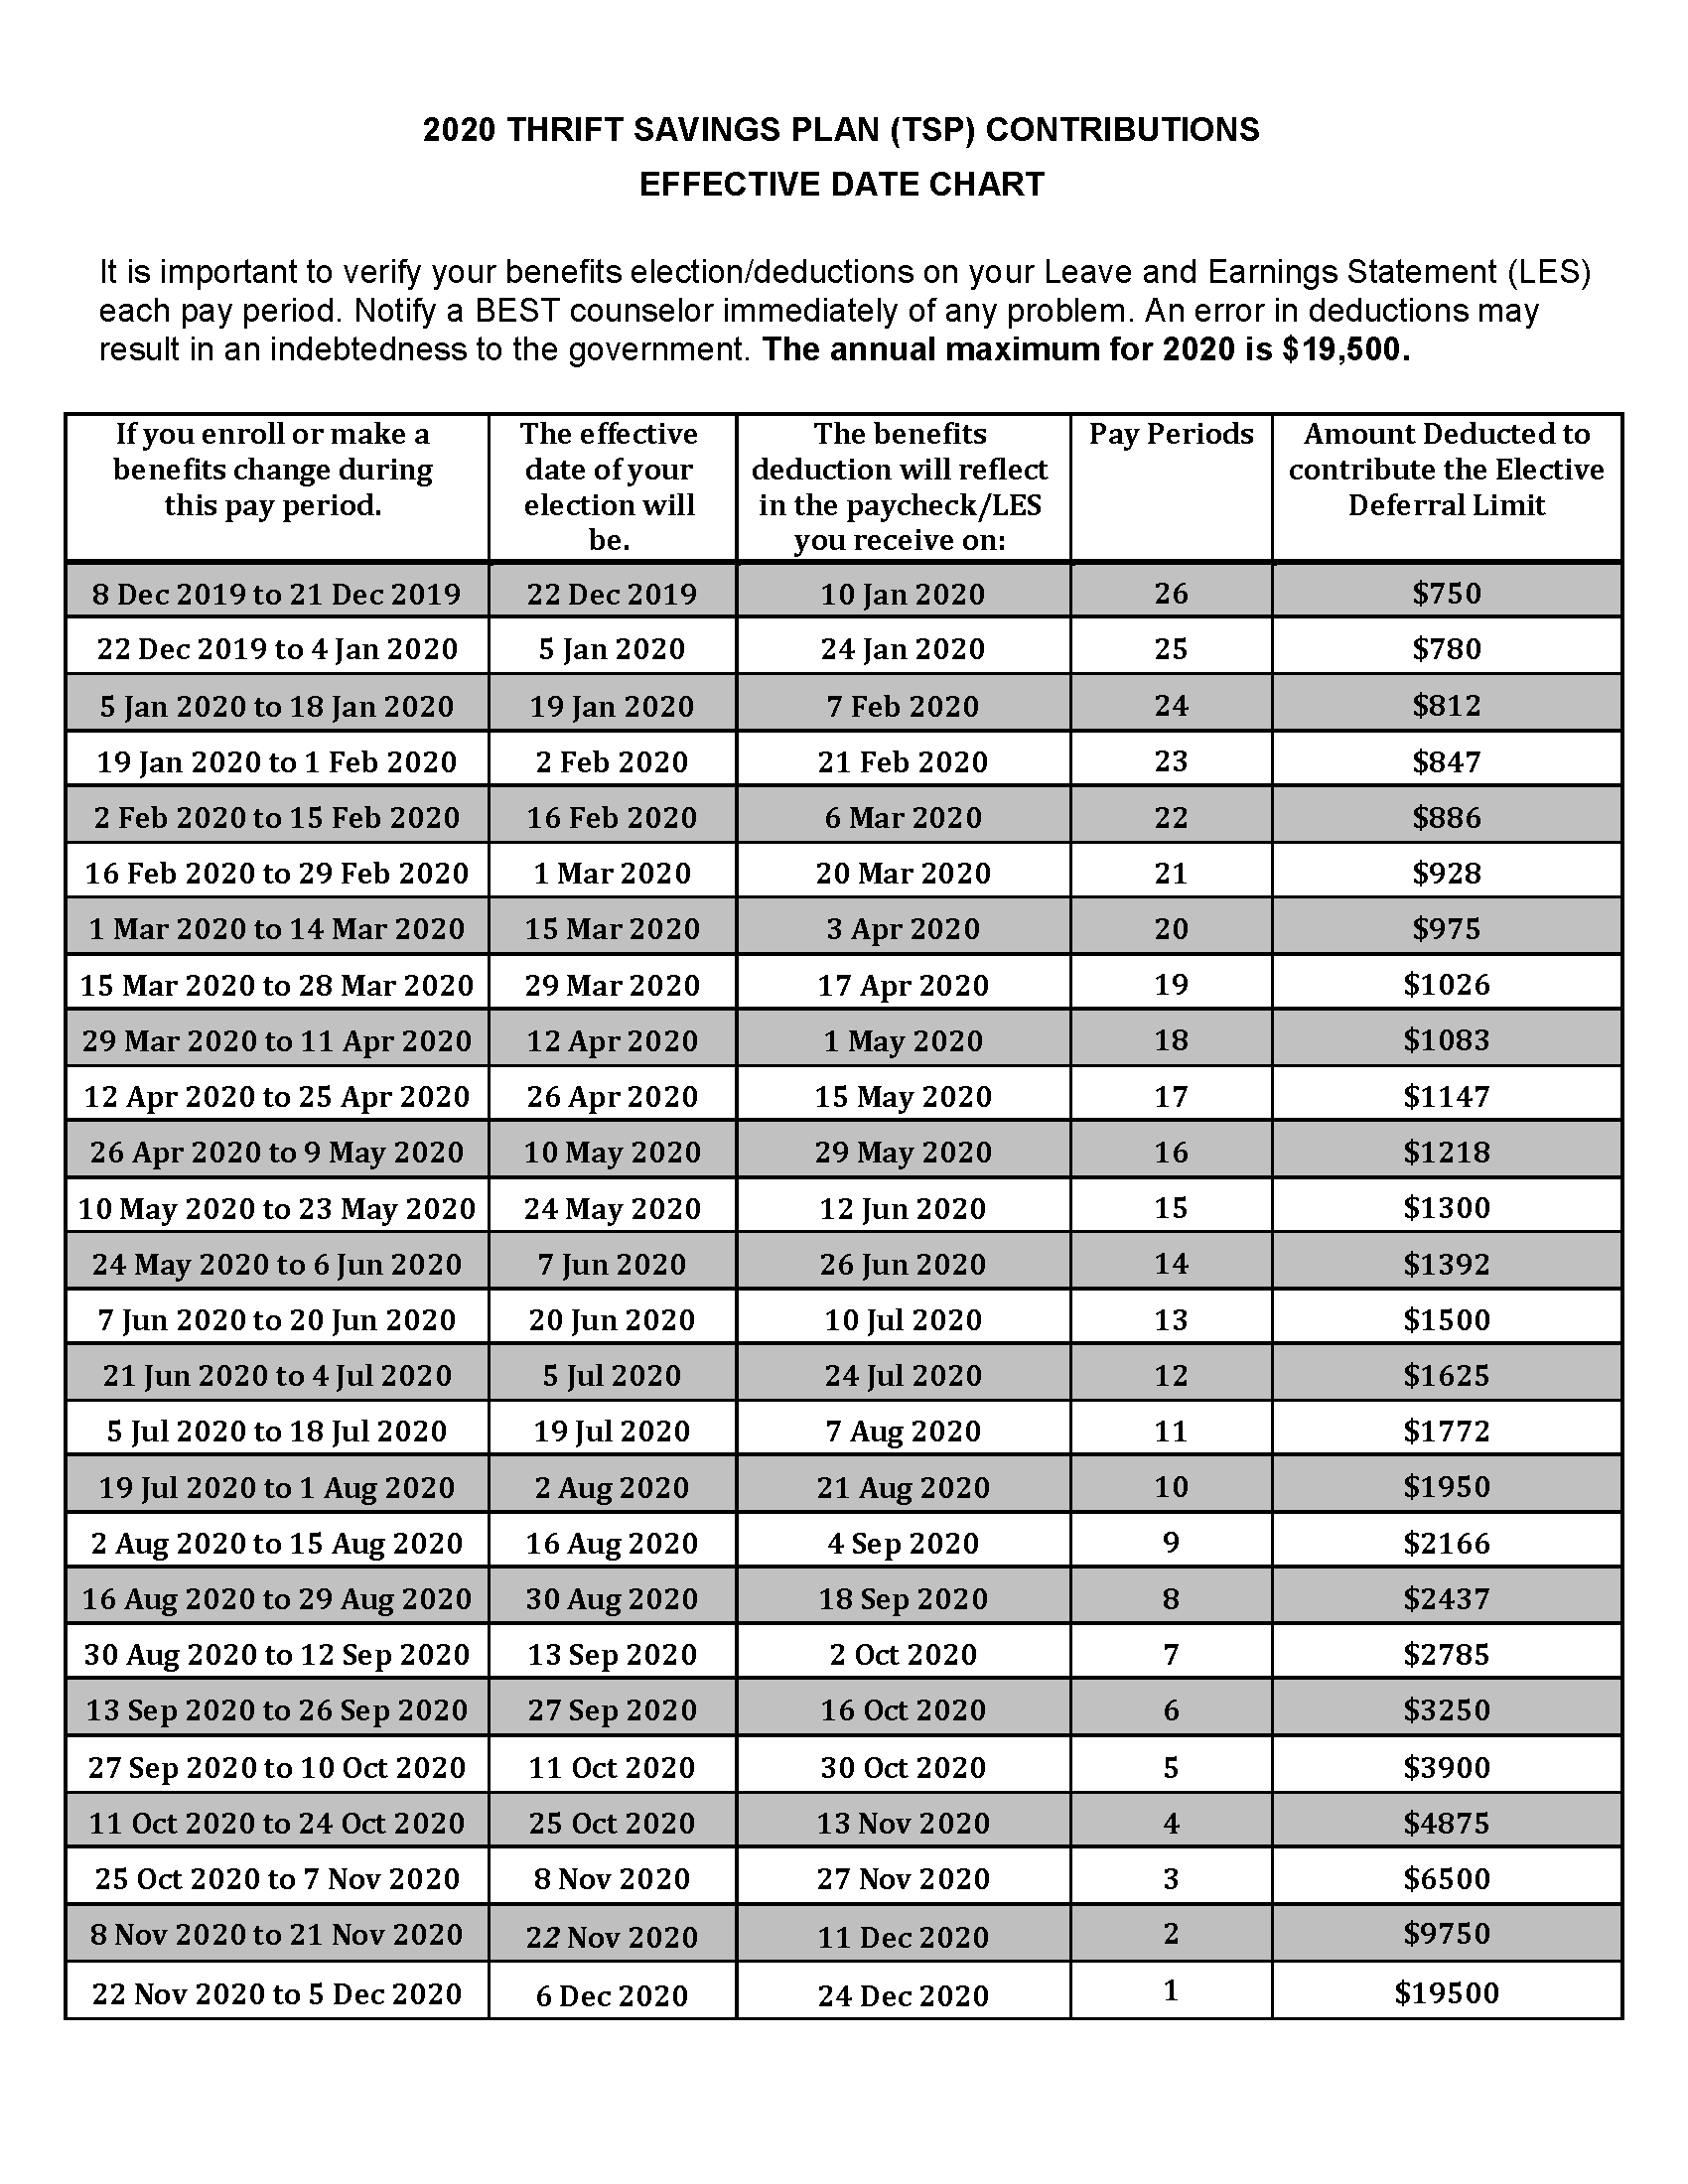 2020 Tsp Contributions And Effective Date Chart : Uscg